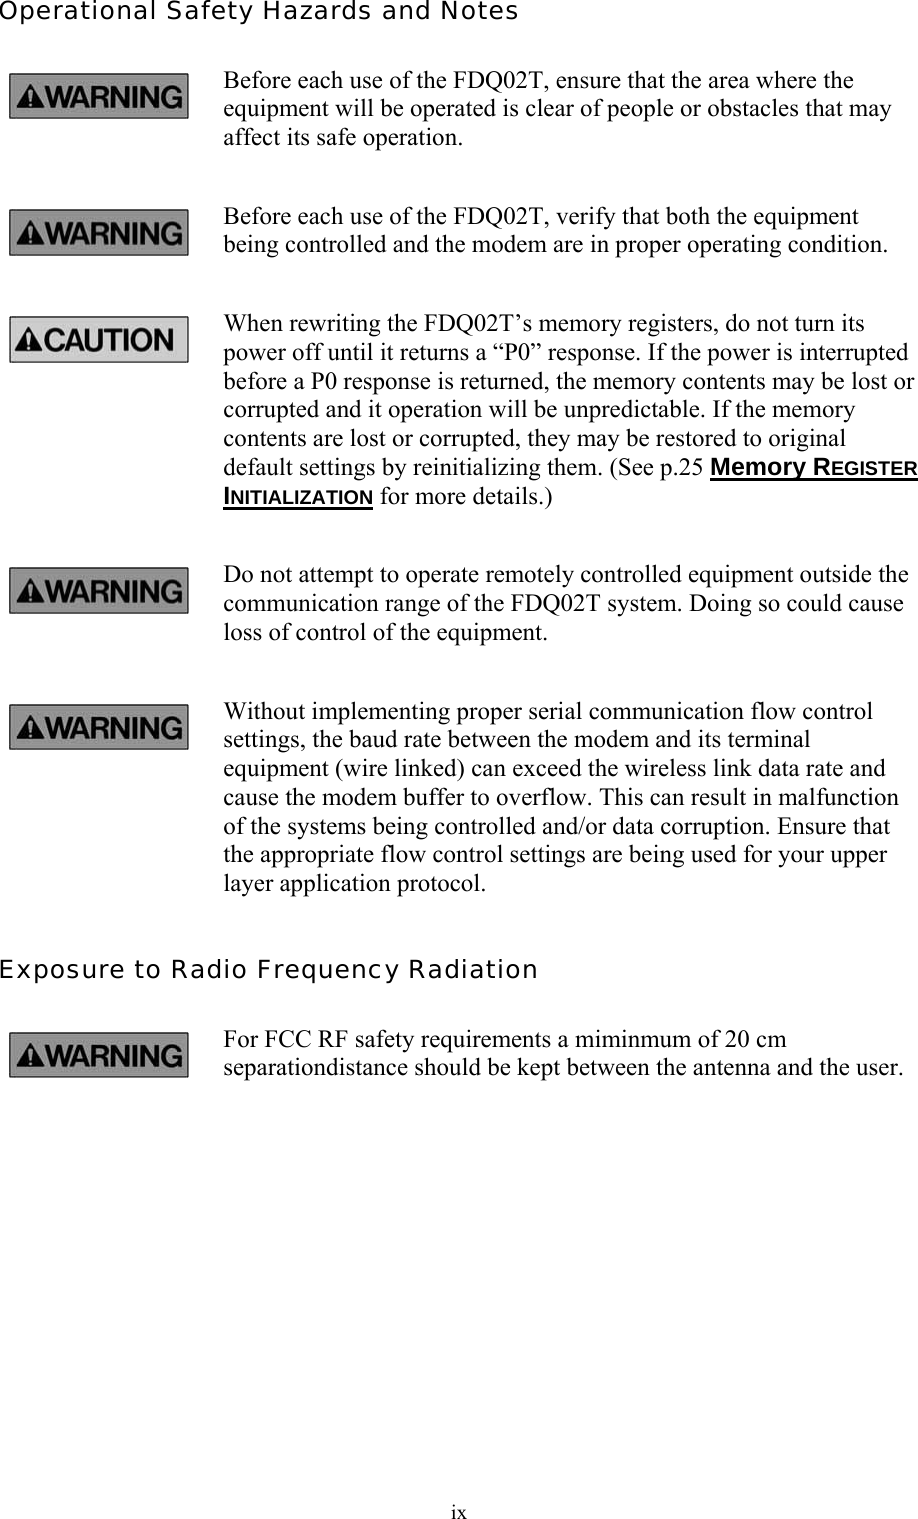  ixOperational Safety Hazards and Notes Before each use of the FDQ02T, ensure that the area where the equipment will be operated is clear of people or obstacles that may affect its safe operation. Before each use of the FDQ02T, verify that both the equipment being controlled and the modem are in proper operating condition. When rewriting the FDQ02T’s memory registers, do not turn its power off until it returns a “P0” response. If the power is interrupted before a P0 response is returned, the memory contents may be lost or corrupted and it operation will be unpredictable. If the memory contents are lost or corrupted, they may be restored to original default settings by reinitializing them. (See p.25 Memory REGISTER INITIALIZATION for more details.) Do not attempt to operate remotely controlled equipment outside the communication range of the FDQ02T system. Doing so could cause loss of control of the equipment. Without implementing proper serial communication flow control settings, the baud rate between the modem and its terminal equipment (wire linked) can exceed the wireless link data rate and cause the modem buffer to overflow. This can result in malfunction of the systems being controlled and/or data corruption. Ensure that the appropriate flow control settings are being used for your upper layer application protocol. Exposure to Radio Frequency Radiation For FCC RF safety requirements a miminmum of 20 cm separationdistance should be kept between the antenna and the user.  